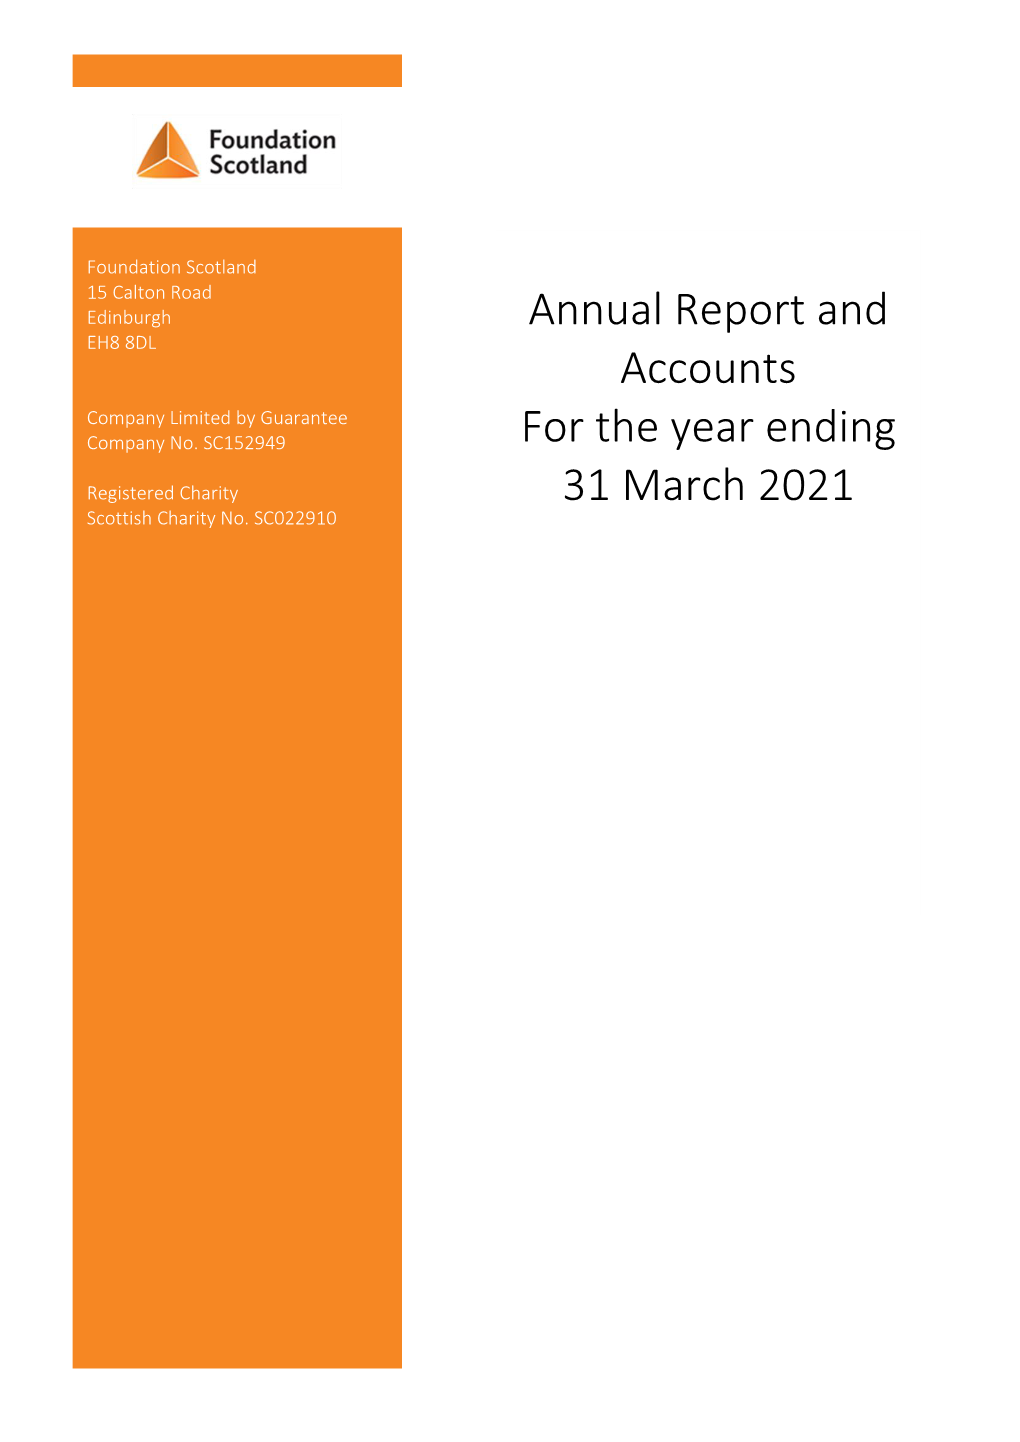 Annual Report and Accounts for the Year Ending 31 March 2021